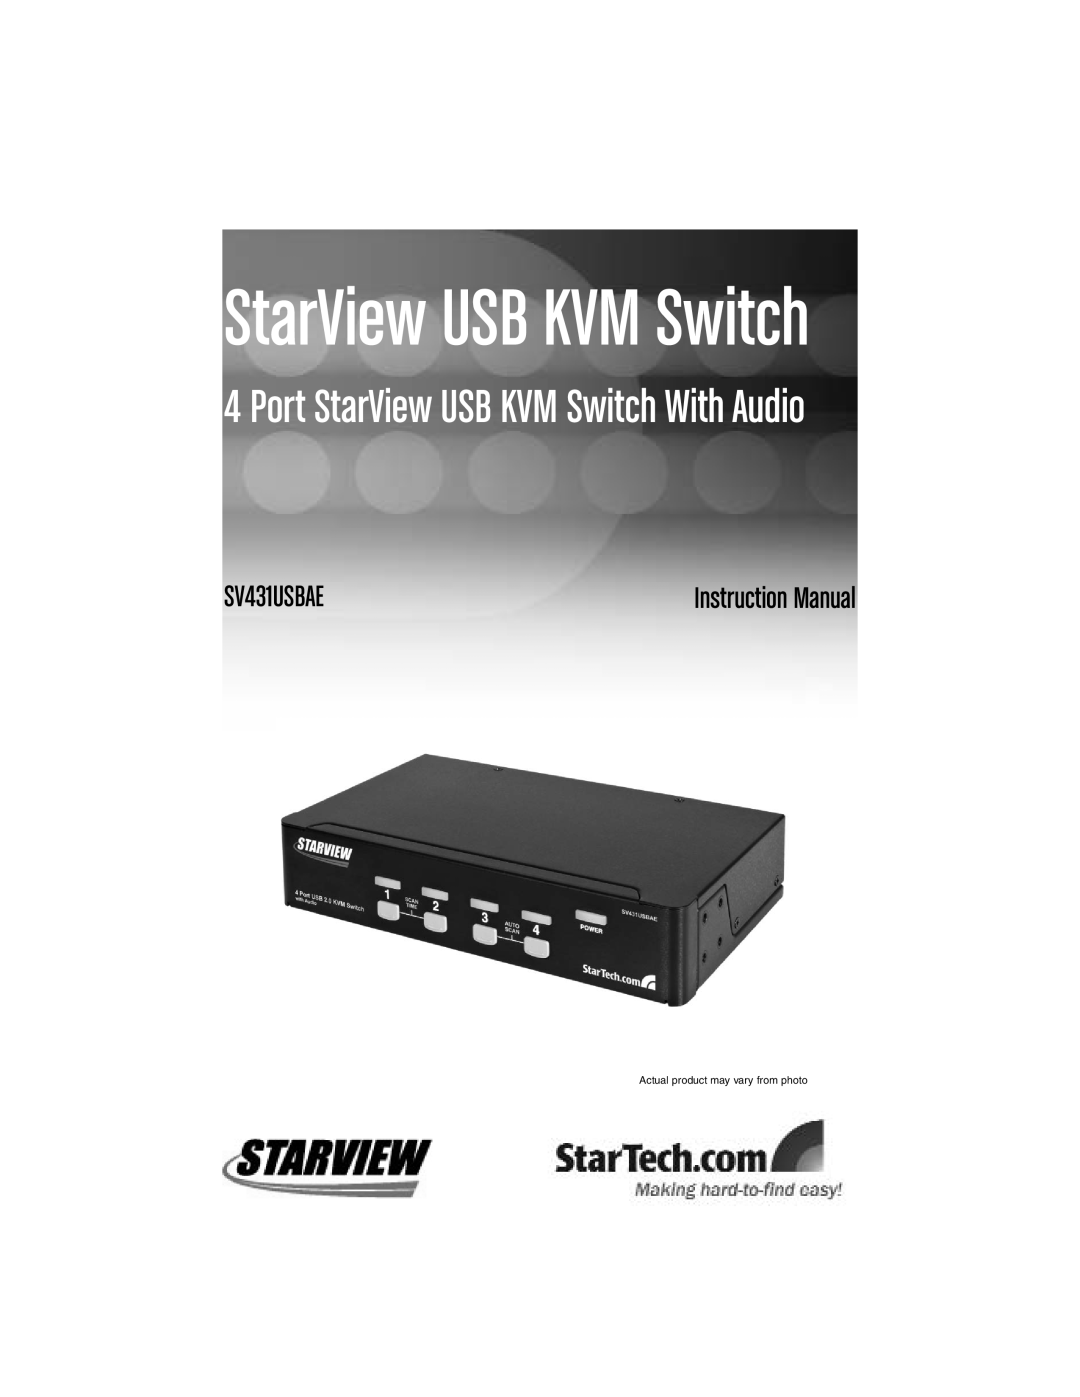 StarTech.com SV431USBAE instruction manual Instruction Manual, StarView USB KVM Switch, Actual product may vary from photo 